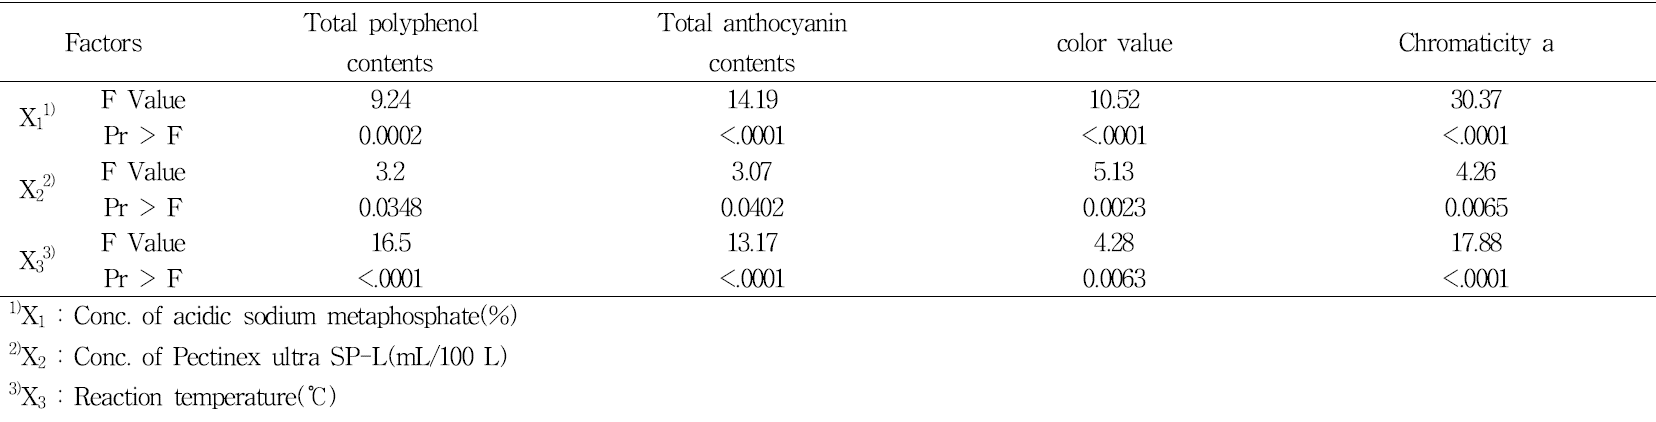 Analysis of variance for the effects of three variables on total polyphenol contents, total anthocyanin contents and color value and chromaticity of acidic sodium metaphosphate and Pectinex ultra SP-L enzyme treatment from strawberry concentration.